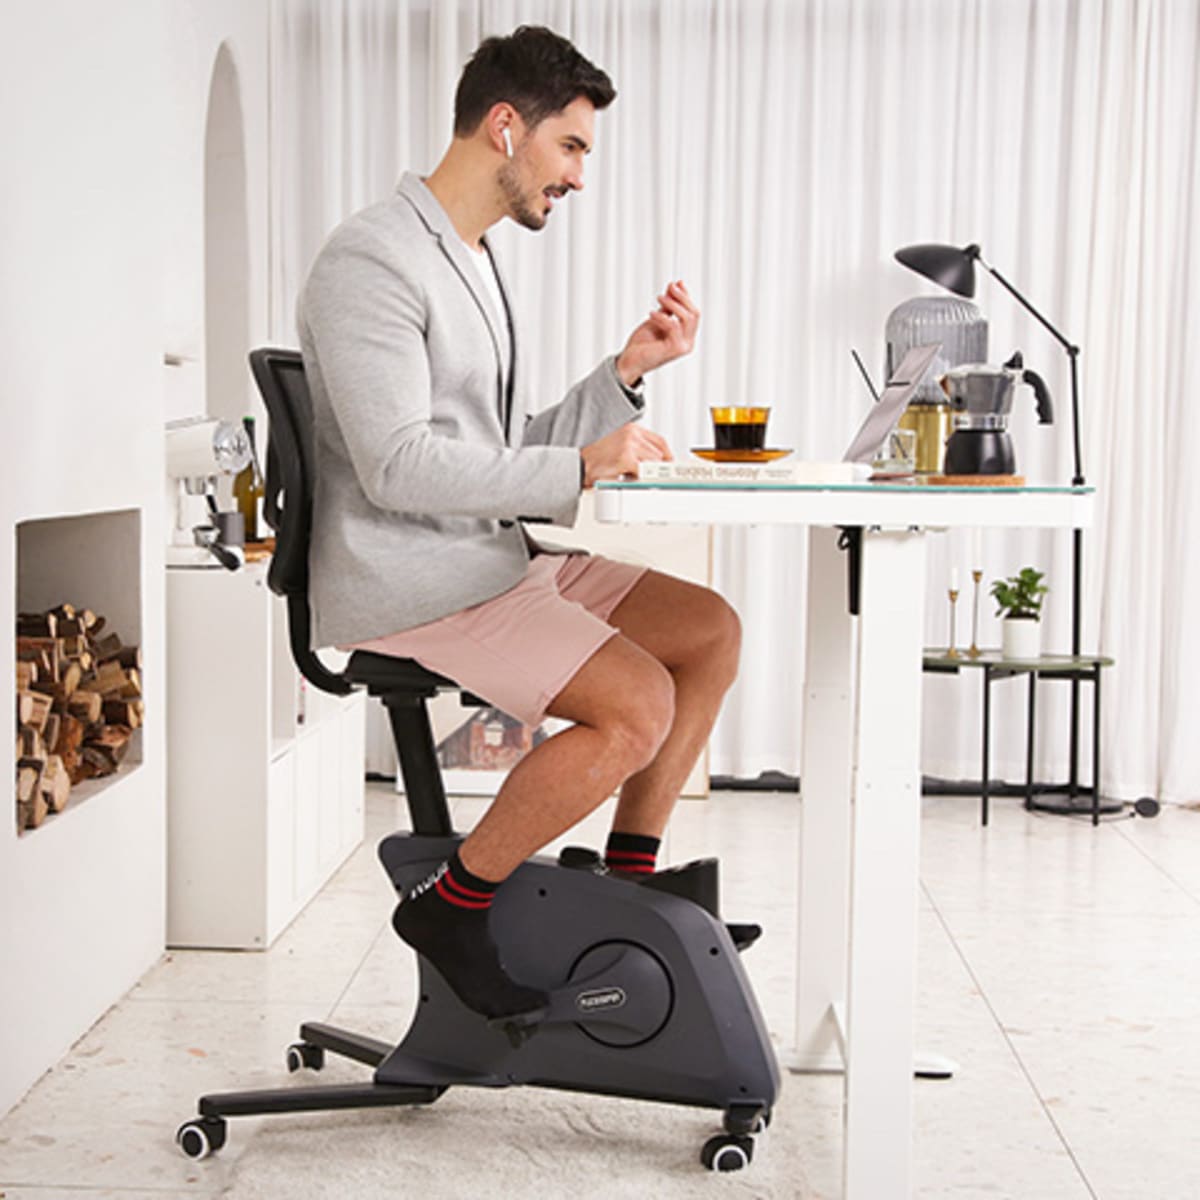 Work Out While You're Working? 9 Fitness Gadgets to Fit Under a